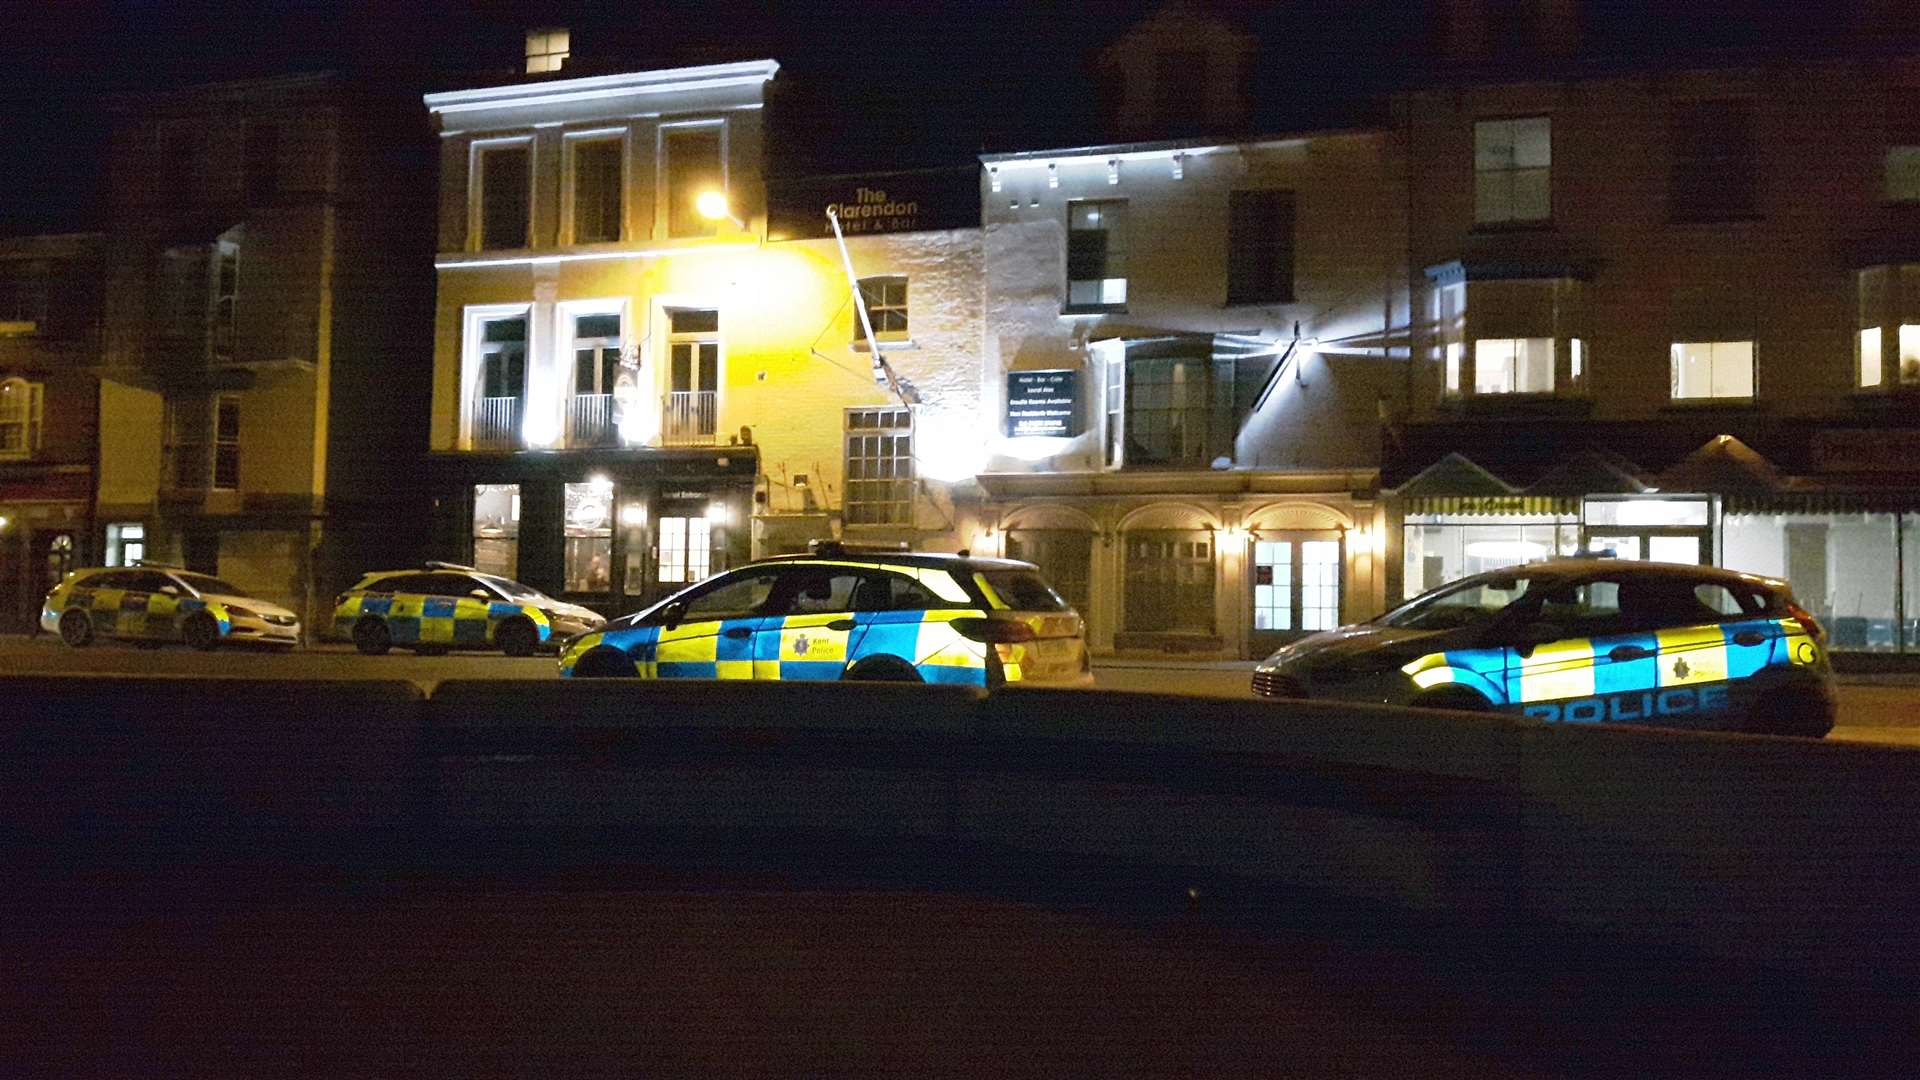 Police in Beach Street, Deal, after the attack